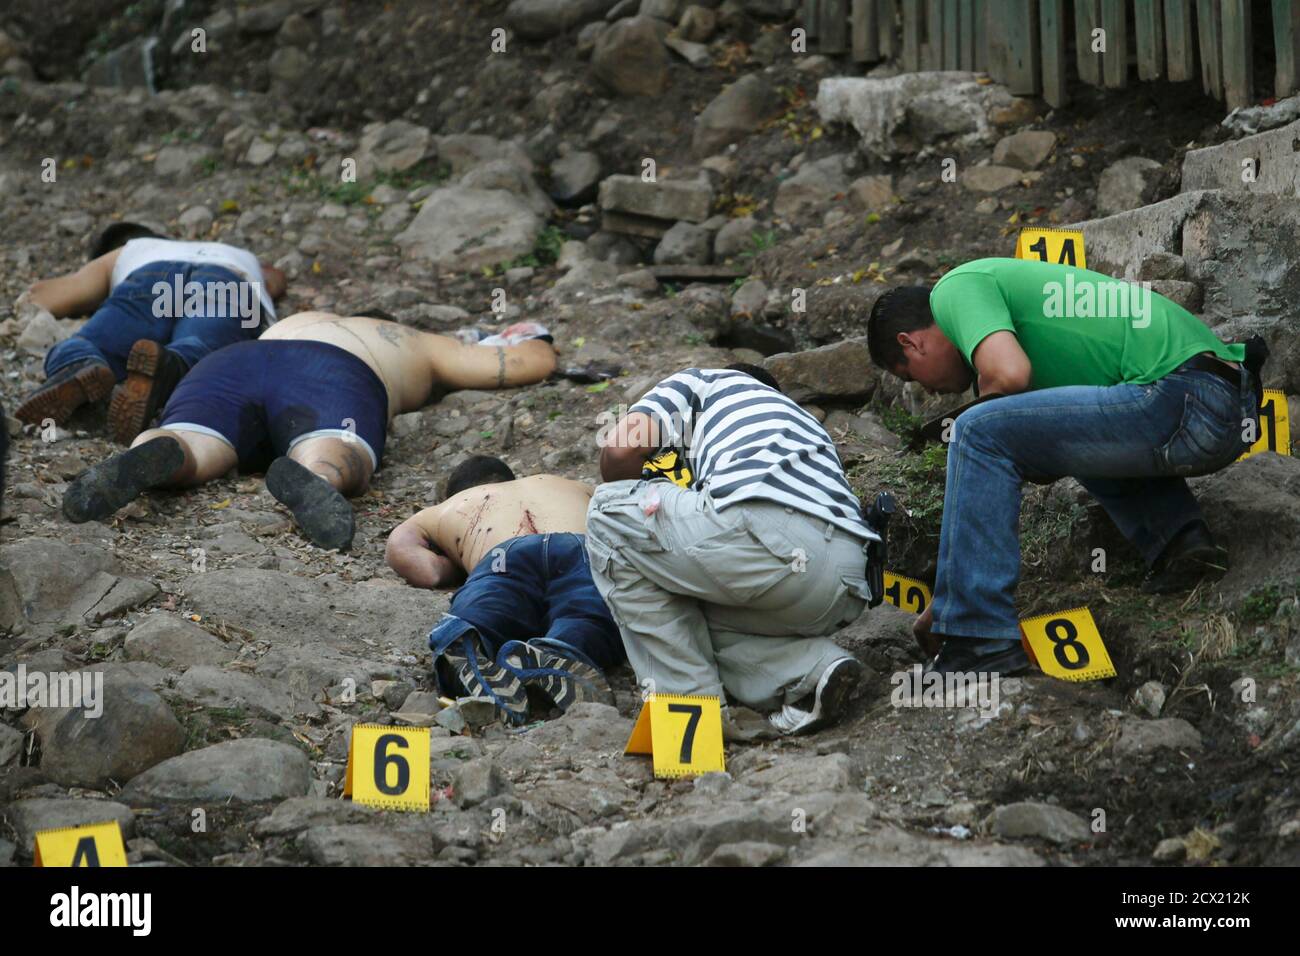 ATTENTION EDITORS - VISUAL COVERAGE OF SCENES OF INJURY OR DEATH  Three unidentified slain men lay dead at Nueva Danli neighborhood in Tegucigalpa, November 28, 2010. According to Ramon Custodio, National Commissioner of Human Rights, the rate of homicides in 2010 in Honduras was of 72.8 homicides per 100,000 inhabitants, the highest in the world. REUTERS/Edgard Garrido (HONDURAS - Tags: OBITUARY CIVIL UNREST) Stock Photo